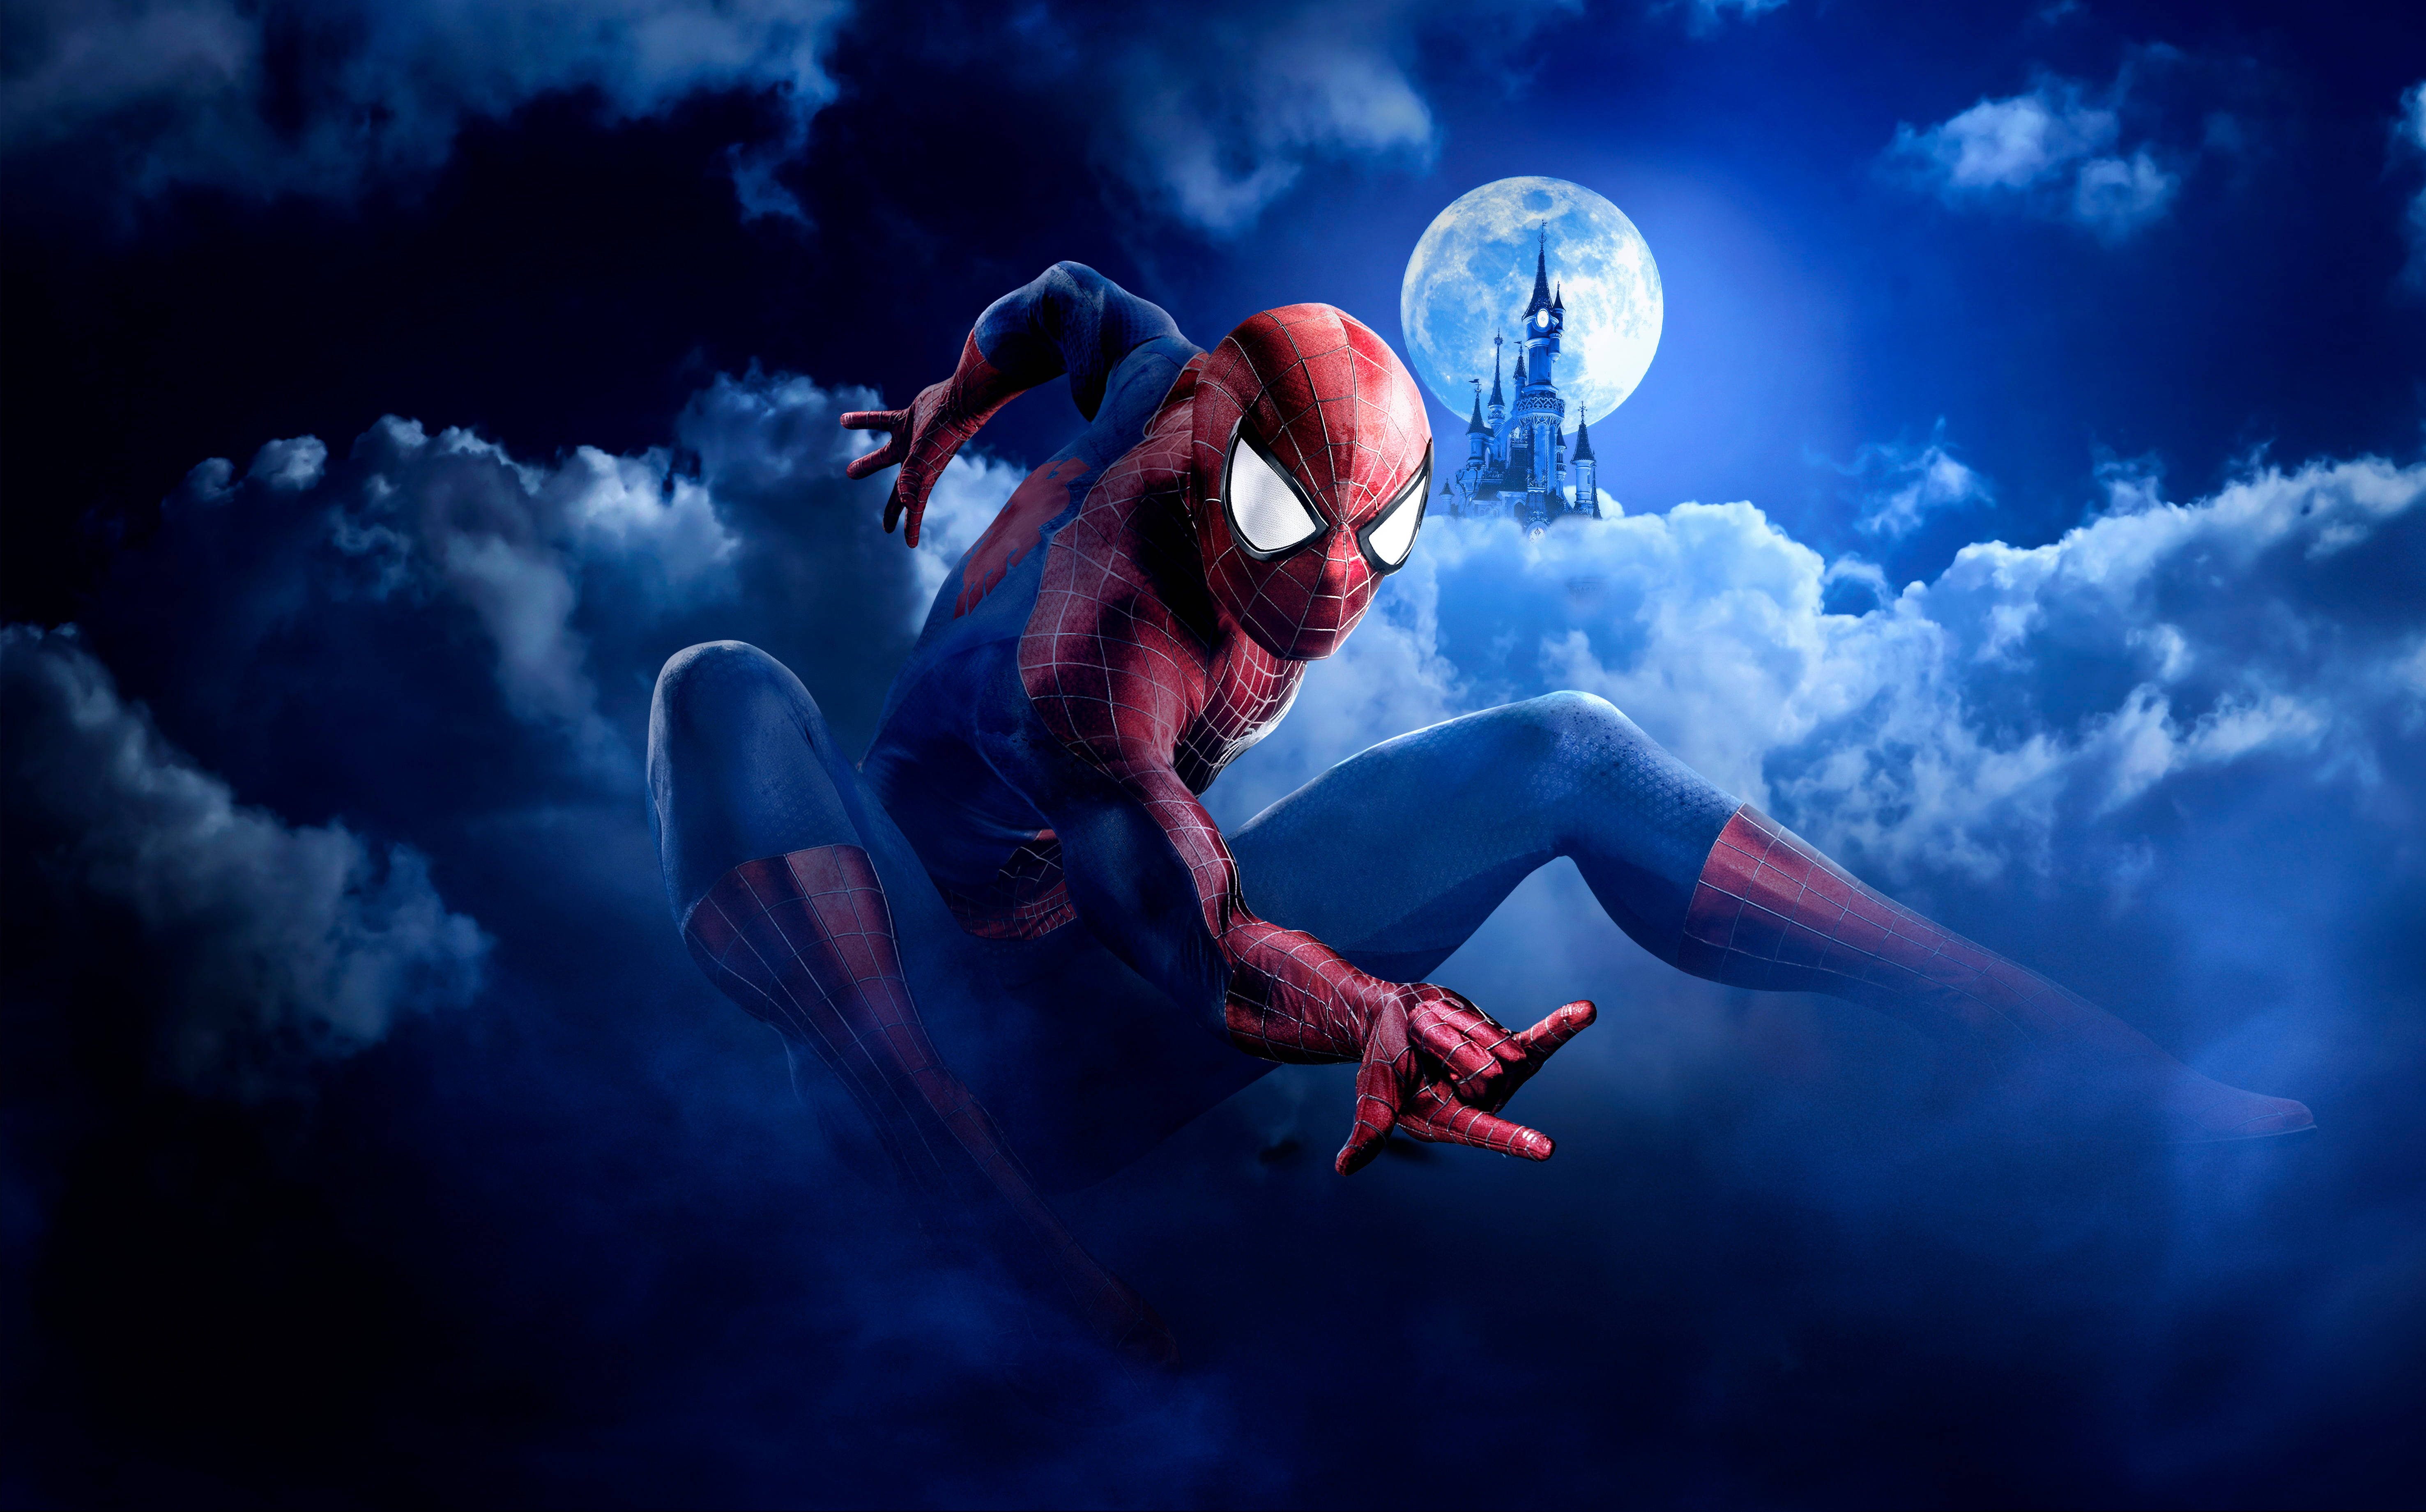 Cool Spiderman In The Clouds Tablet Wallpaper